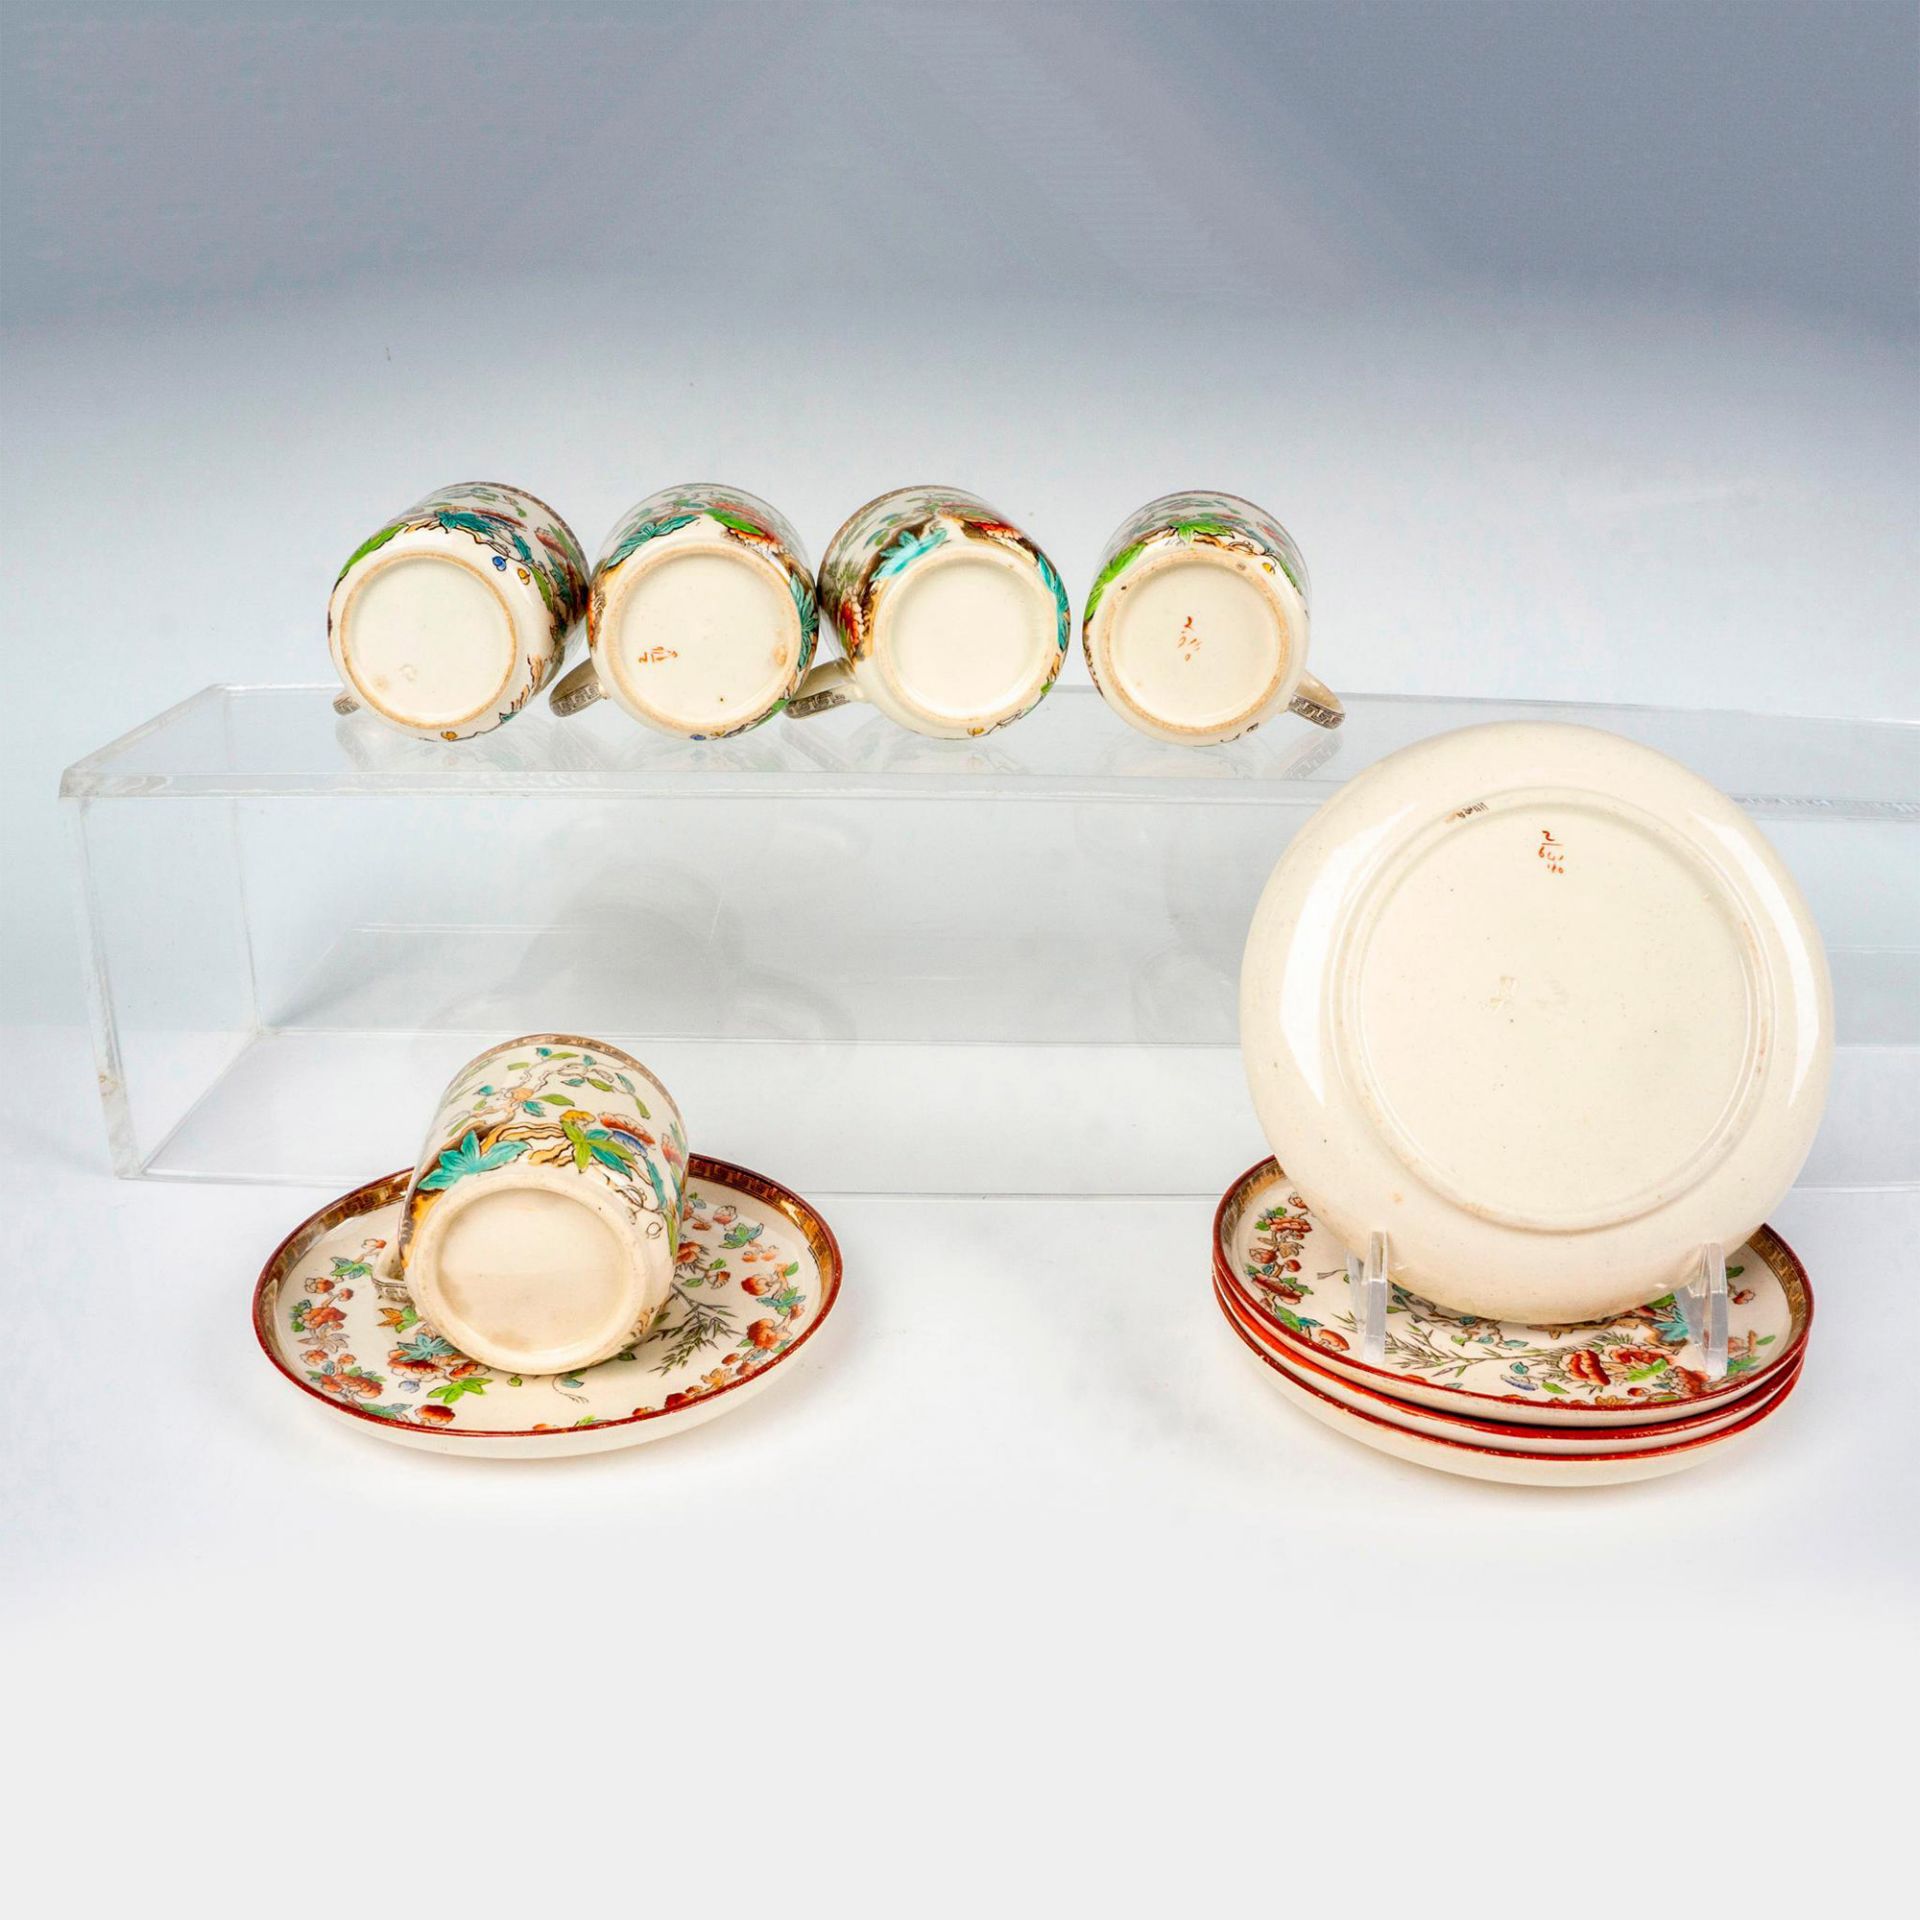 10pc Copeland Demitasse Cups and Saucers - Image 3 of 3